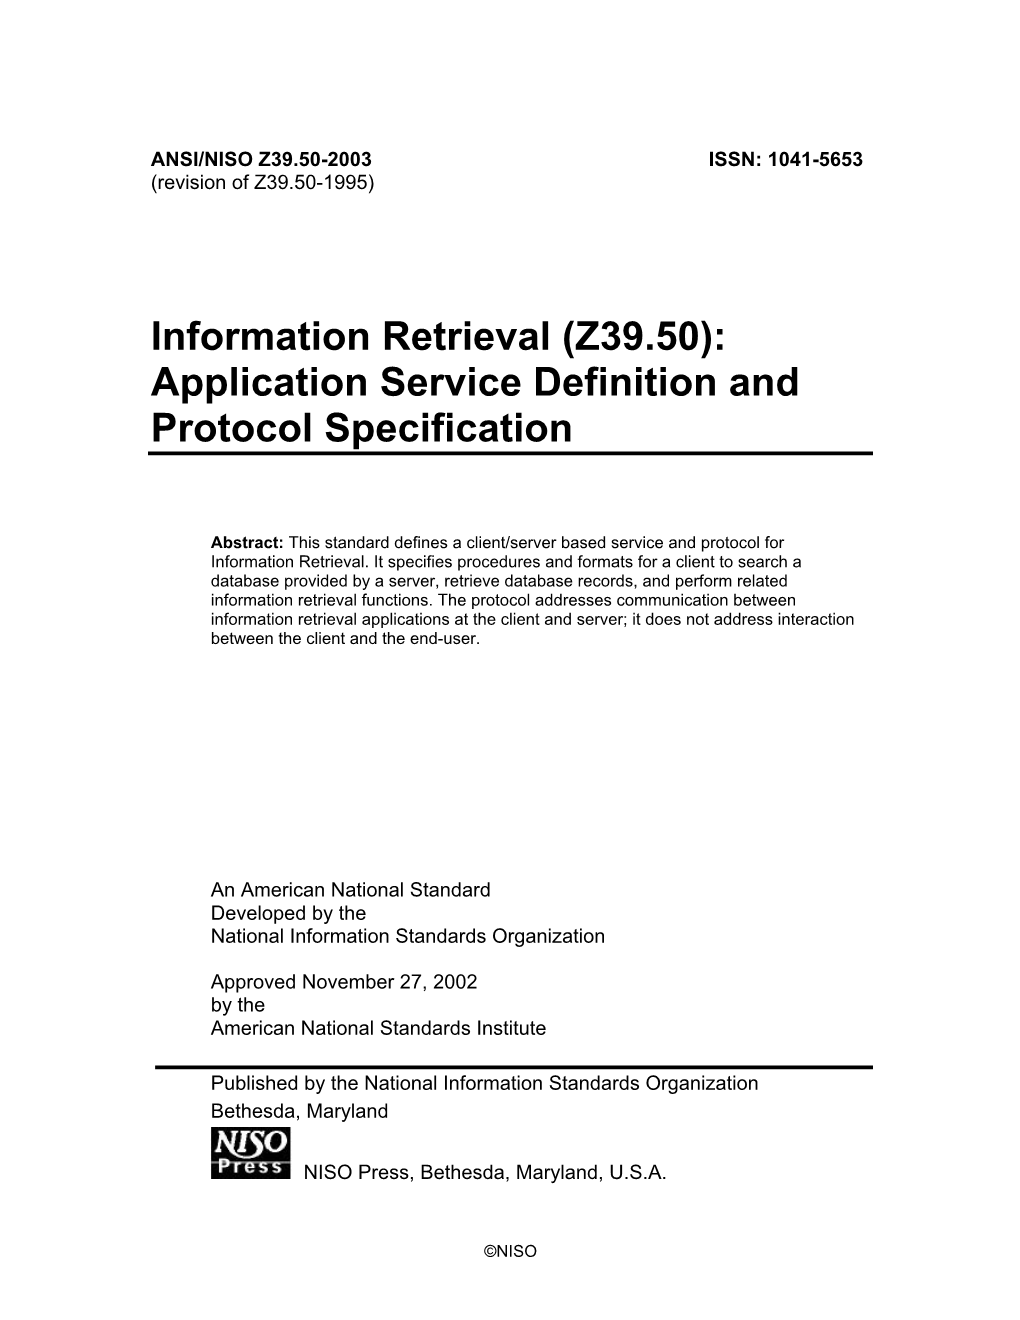 ANSI/NISO Z39.50-2003 Information Retrieval Application Service Definition and Protocol Specification